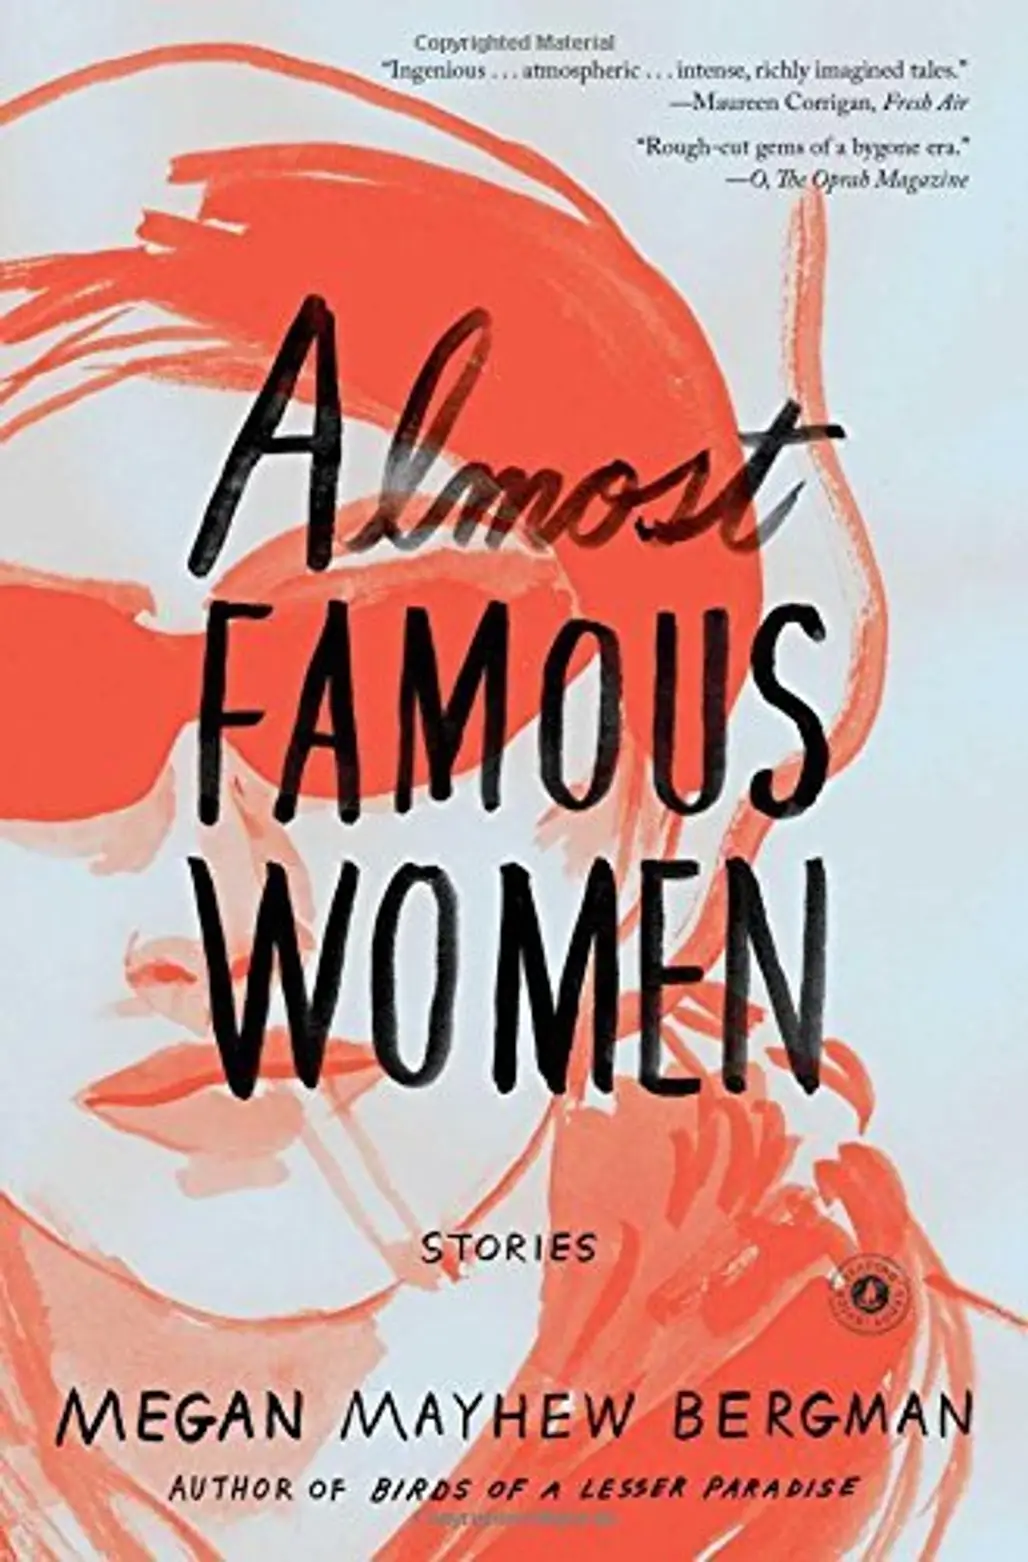 “Almost Famous Women”